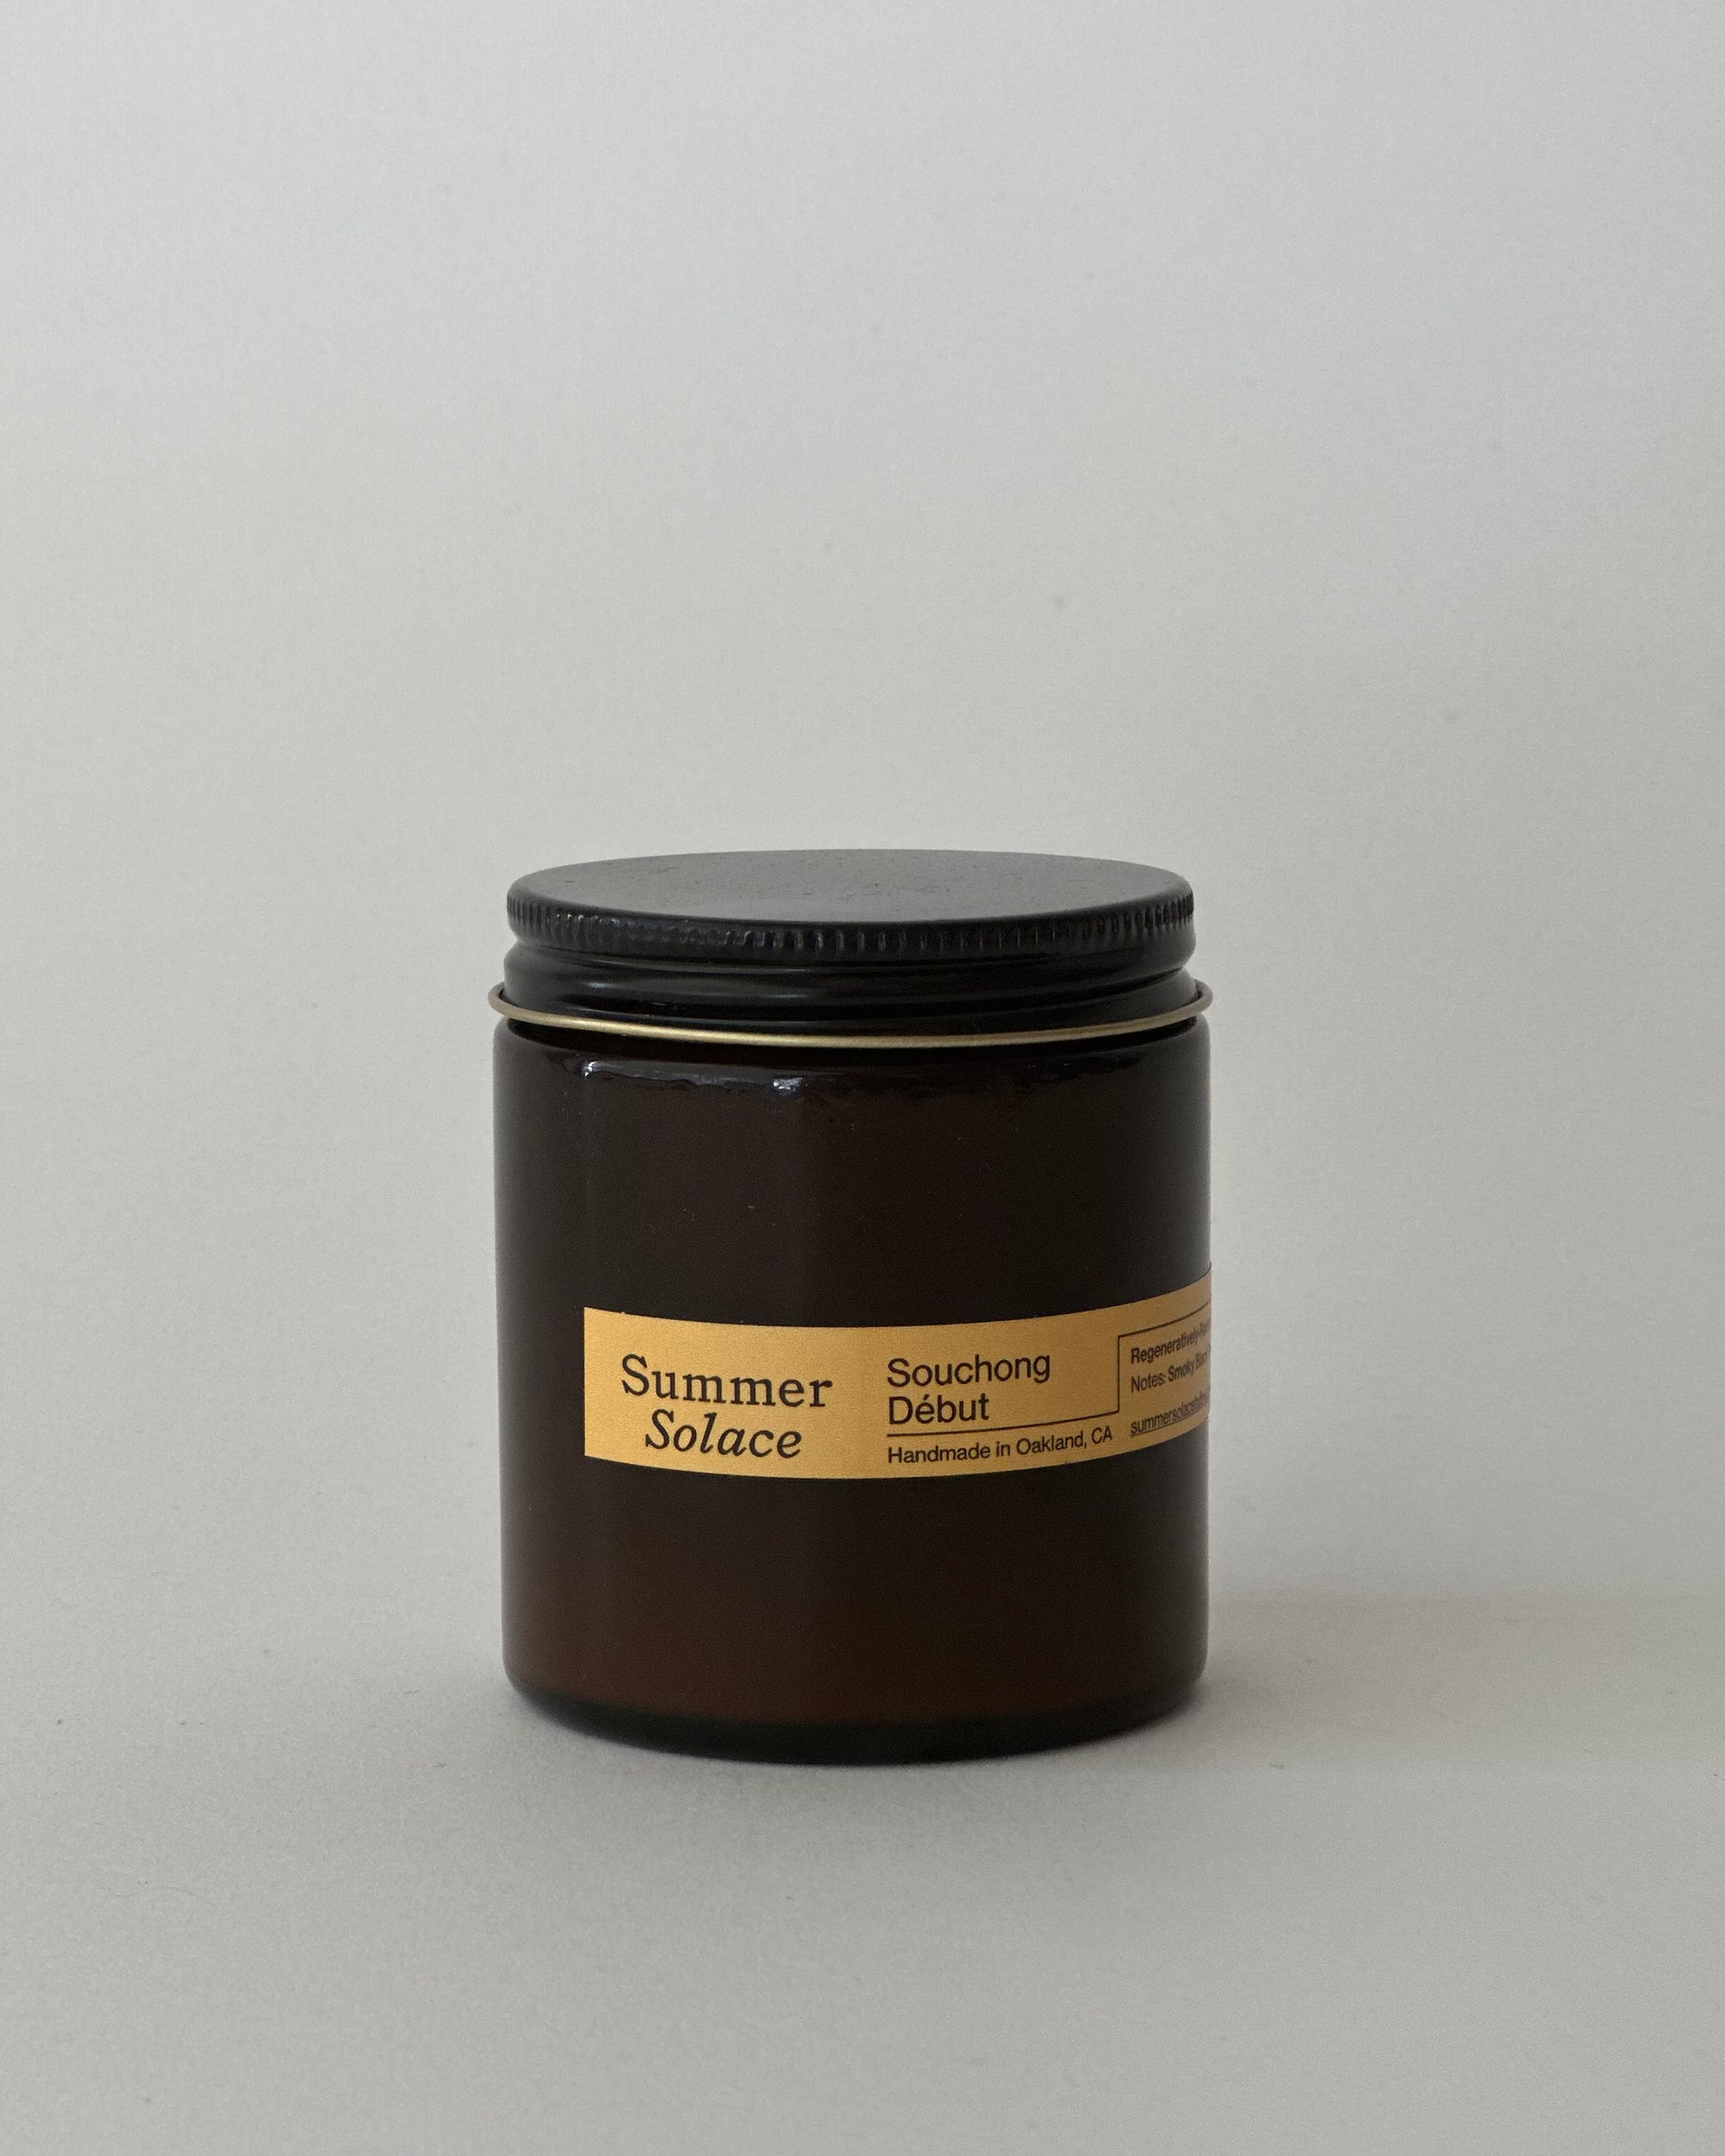 Summer Solace - Souchong Debut Candle